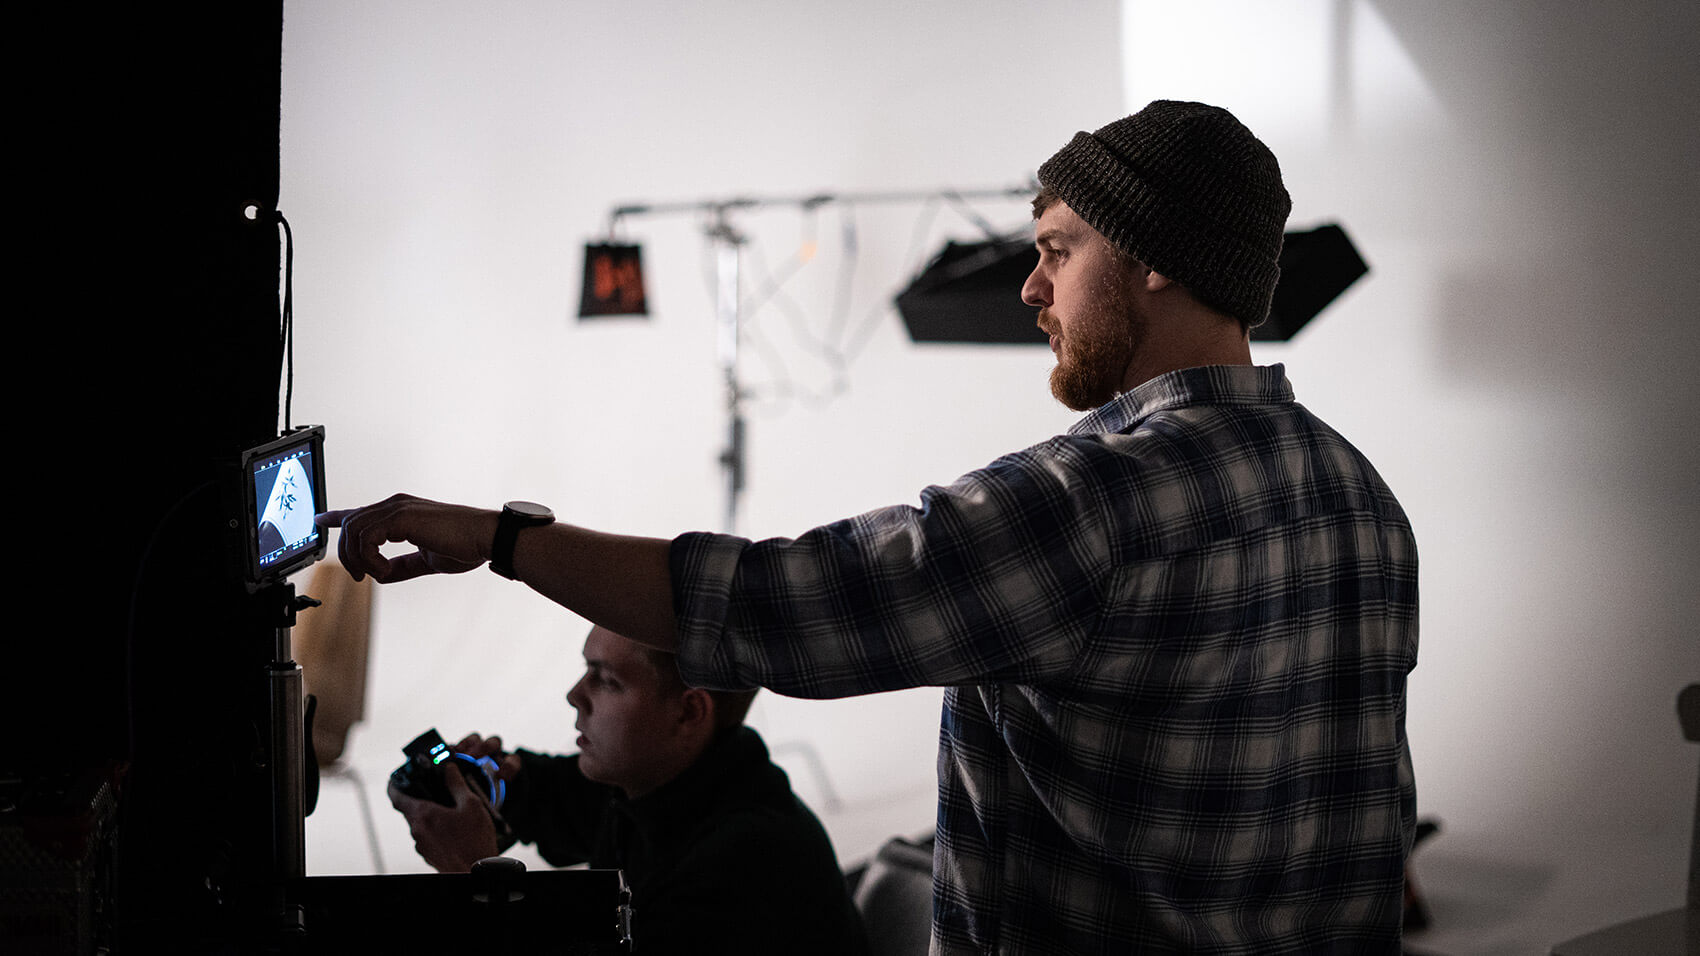 Mark Lunt directing a studio shoot, looking at a video monitor